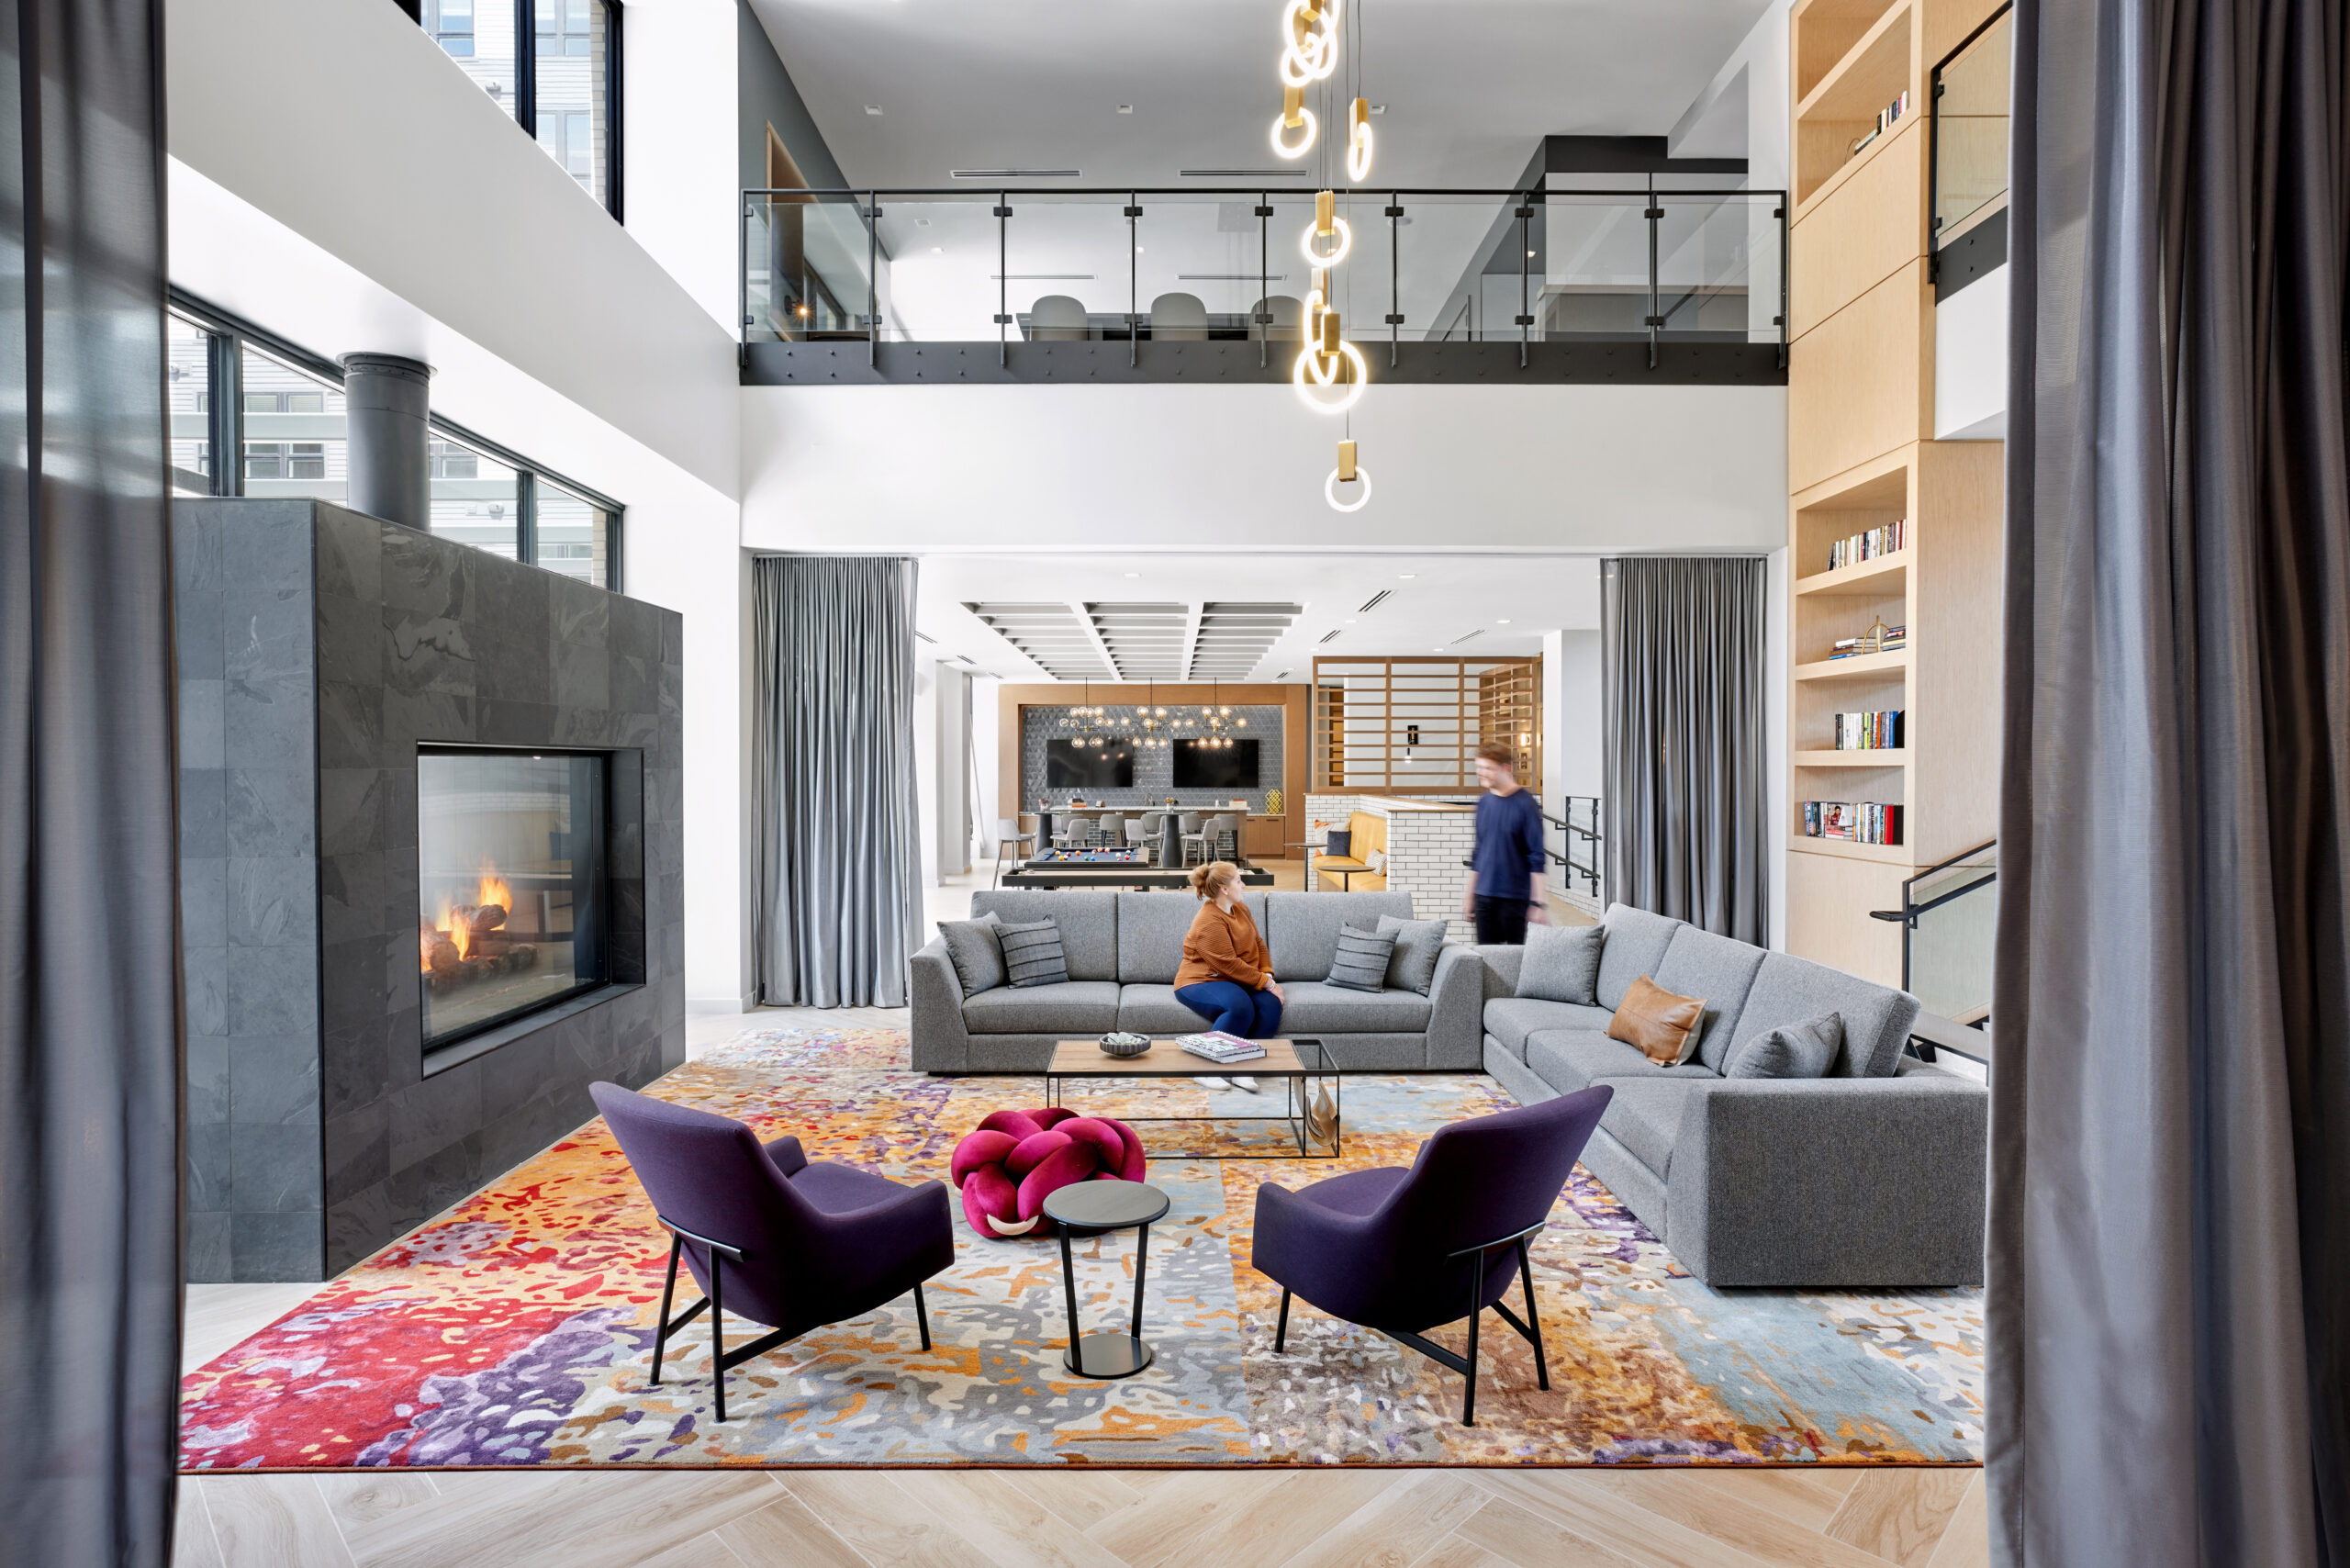 Lounge with gray couches, purple chairs, fireplace and modern chandelier